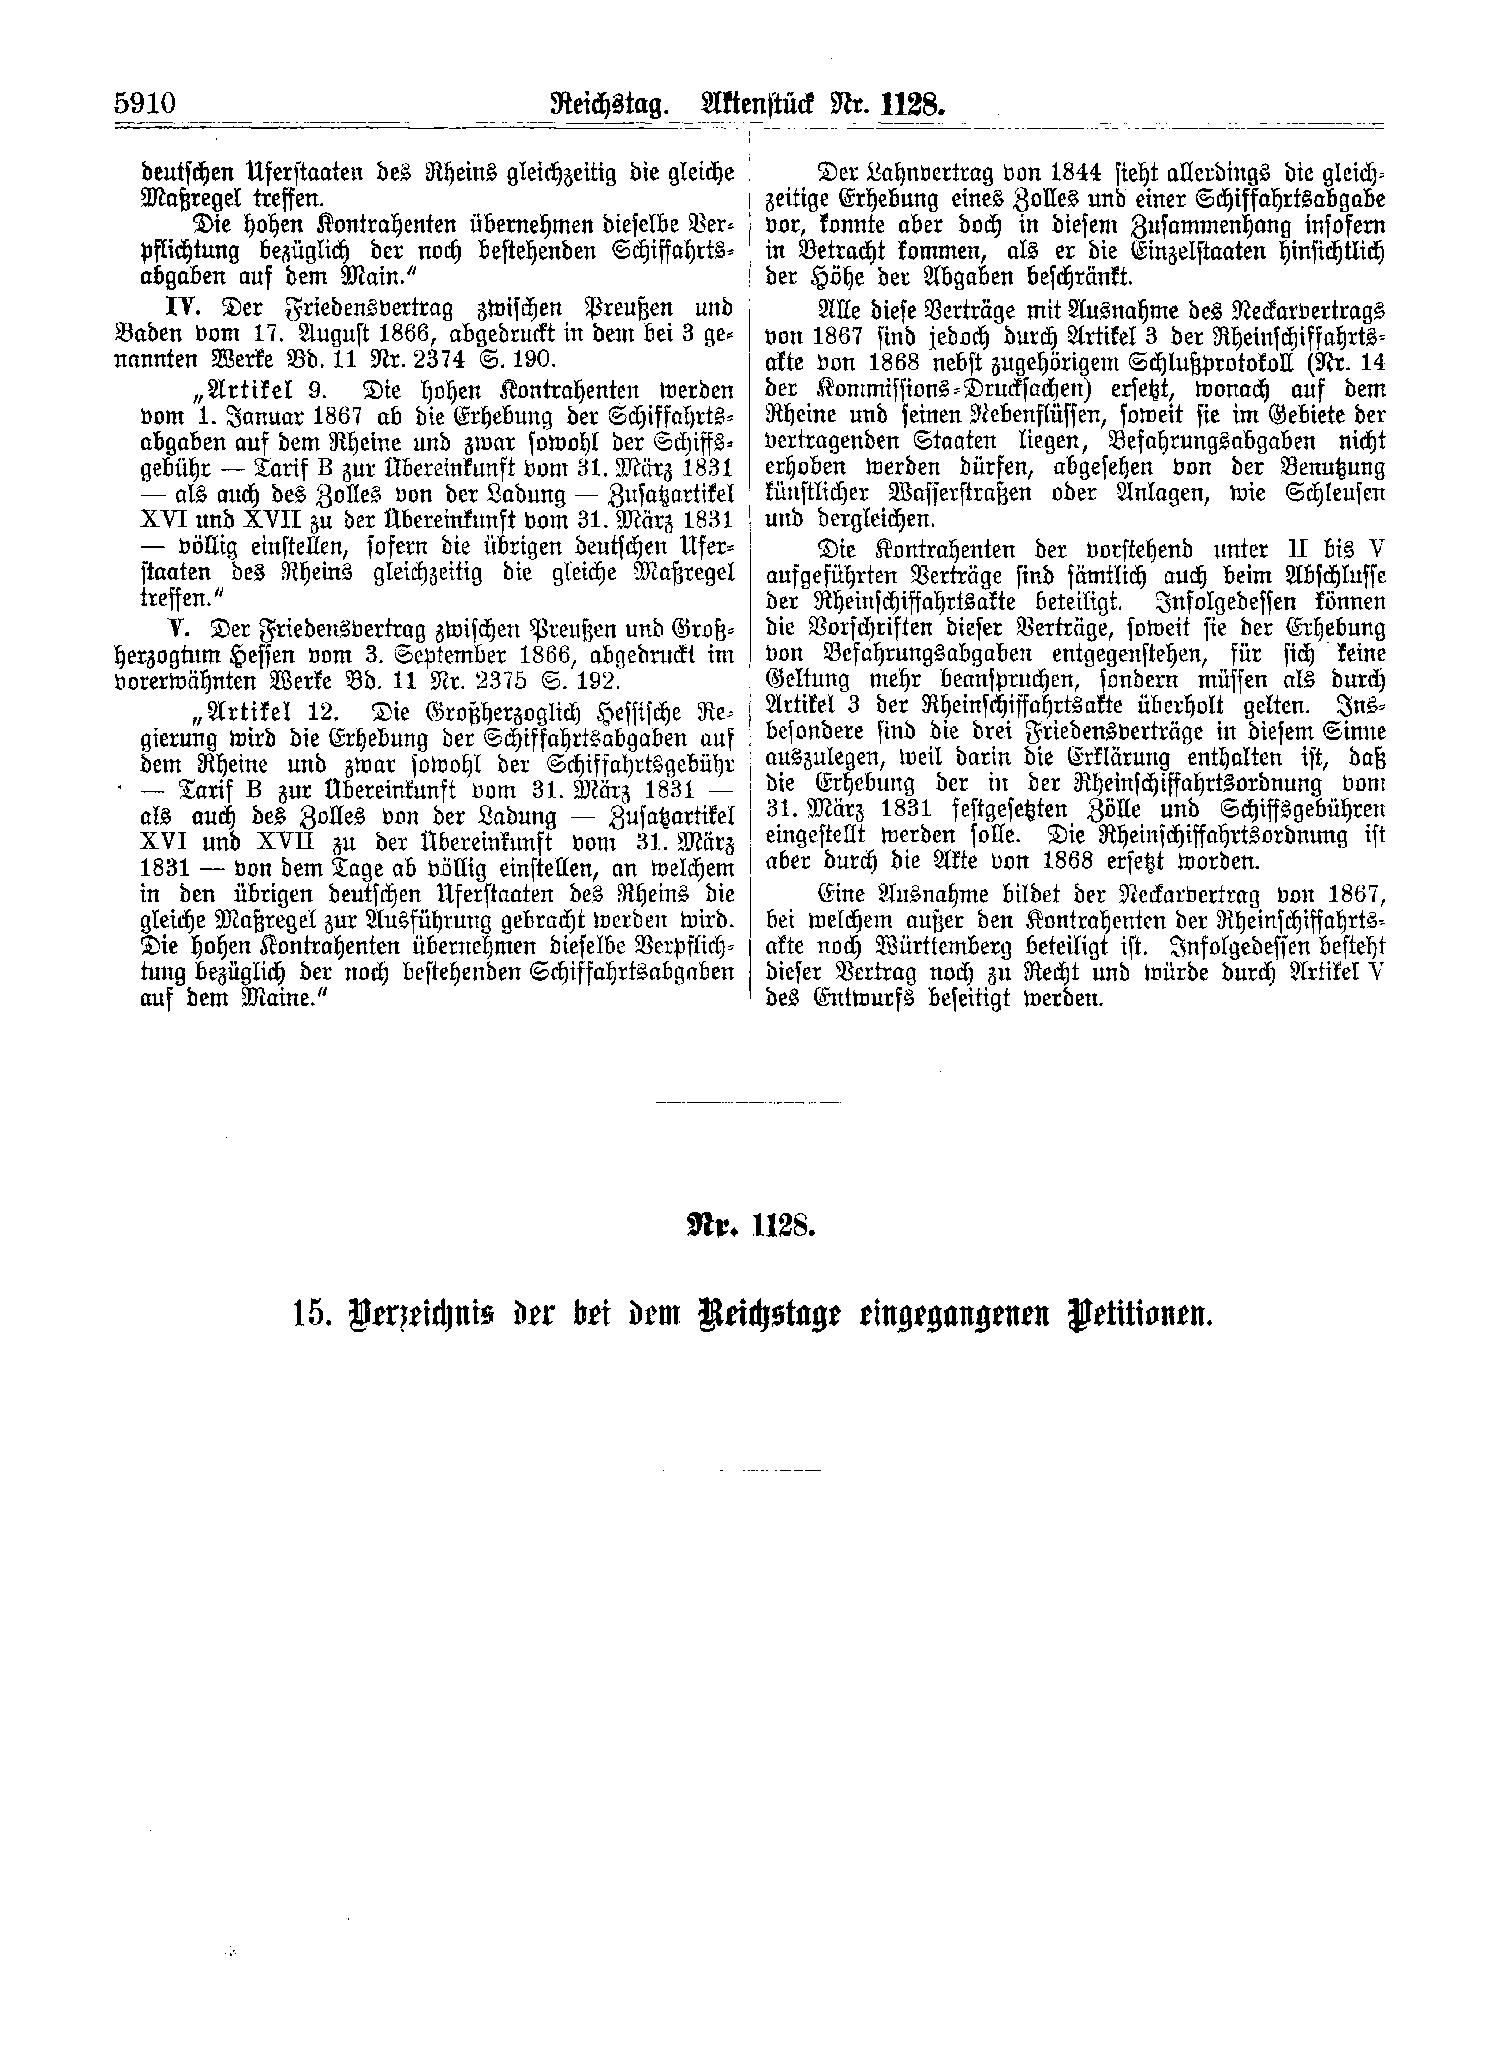 Scan of page 5910